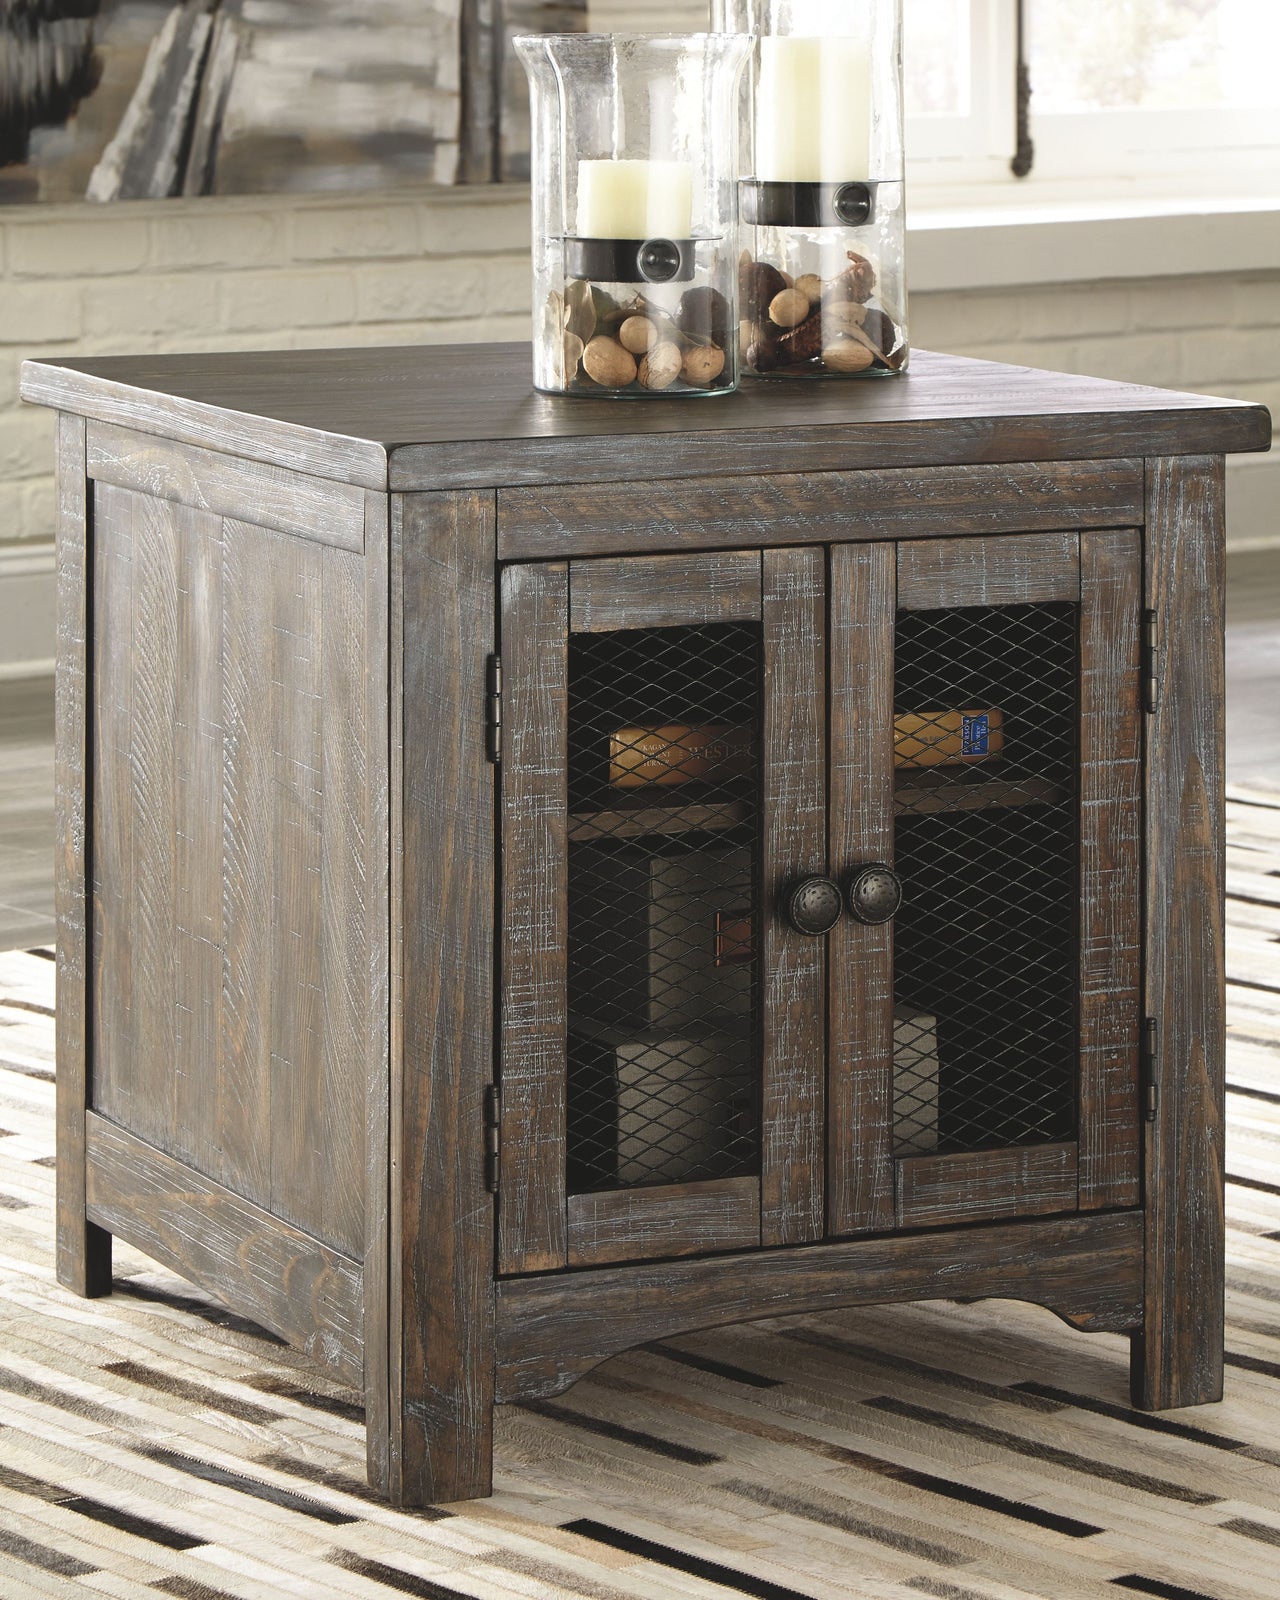 Danell - Brown - Rectangular End Table - Tony's Home Furnishings